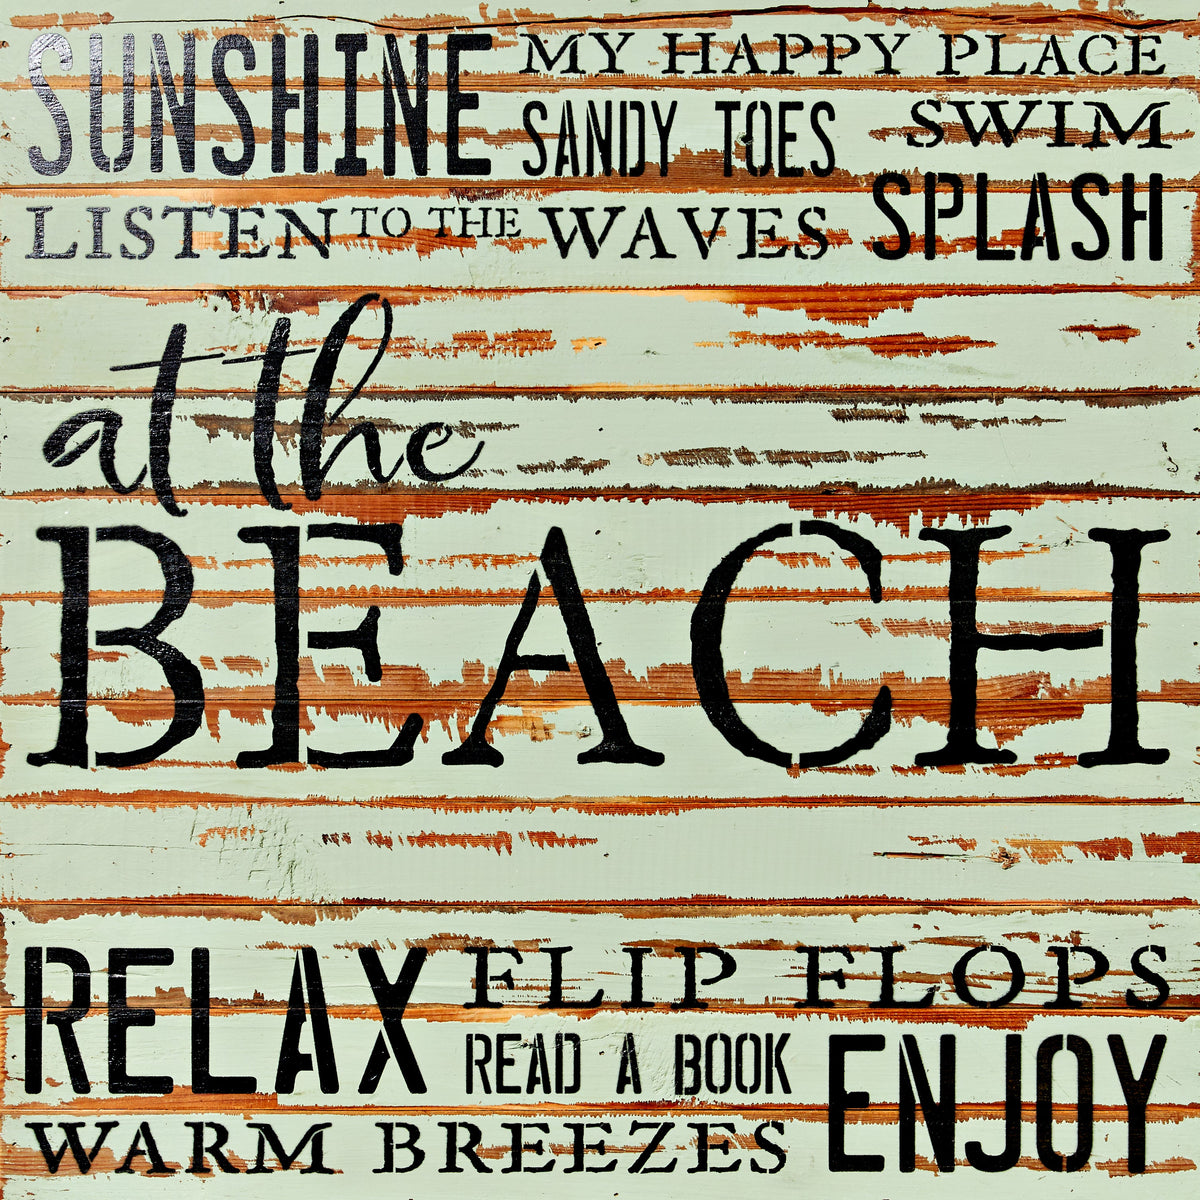 At the beach: my happy place, listen to the waves, read a book, relax... / 24x24 Reclaimed Wood Wall Art